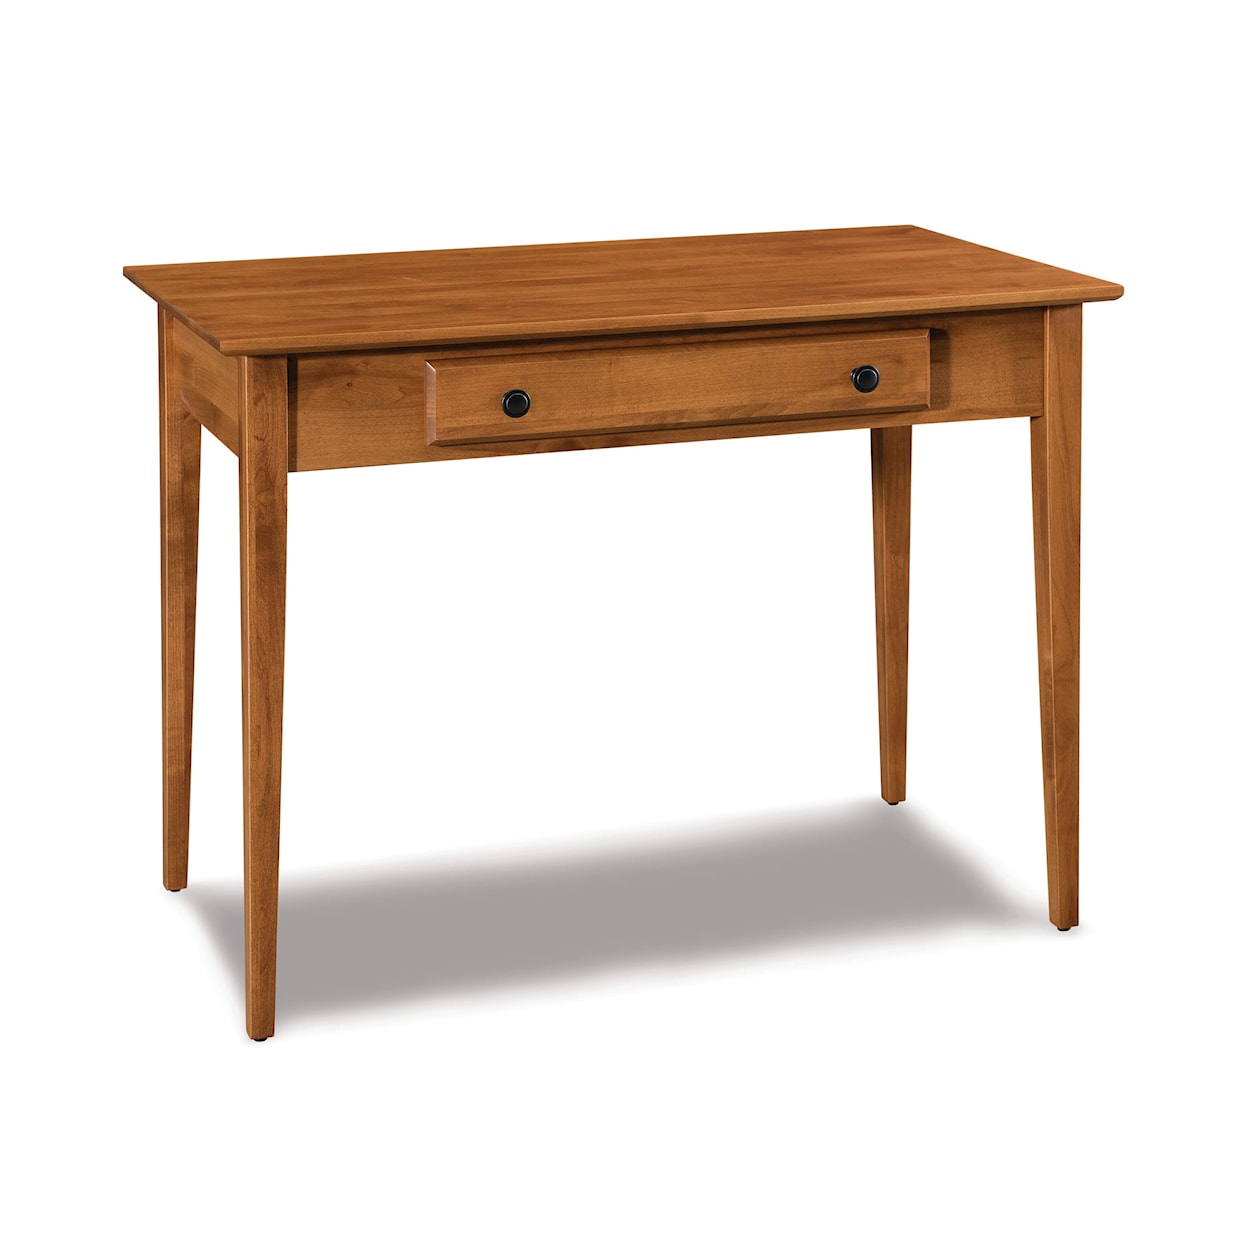 Archbold Furniture Shaker Writing Table with Single Drawer